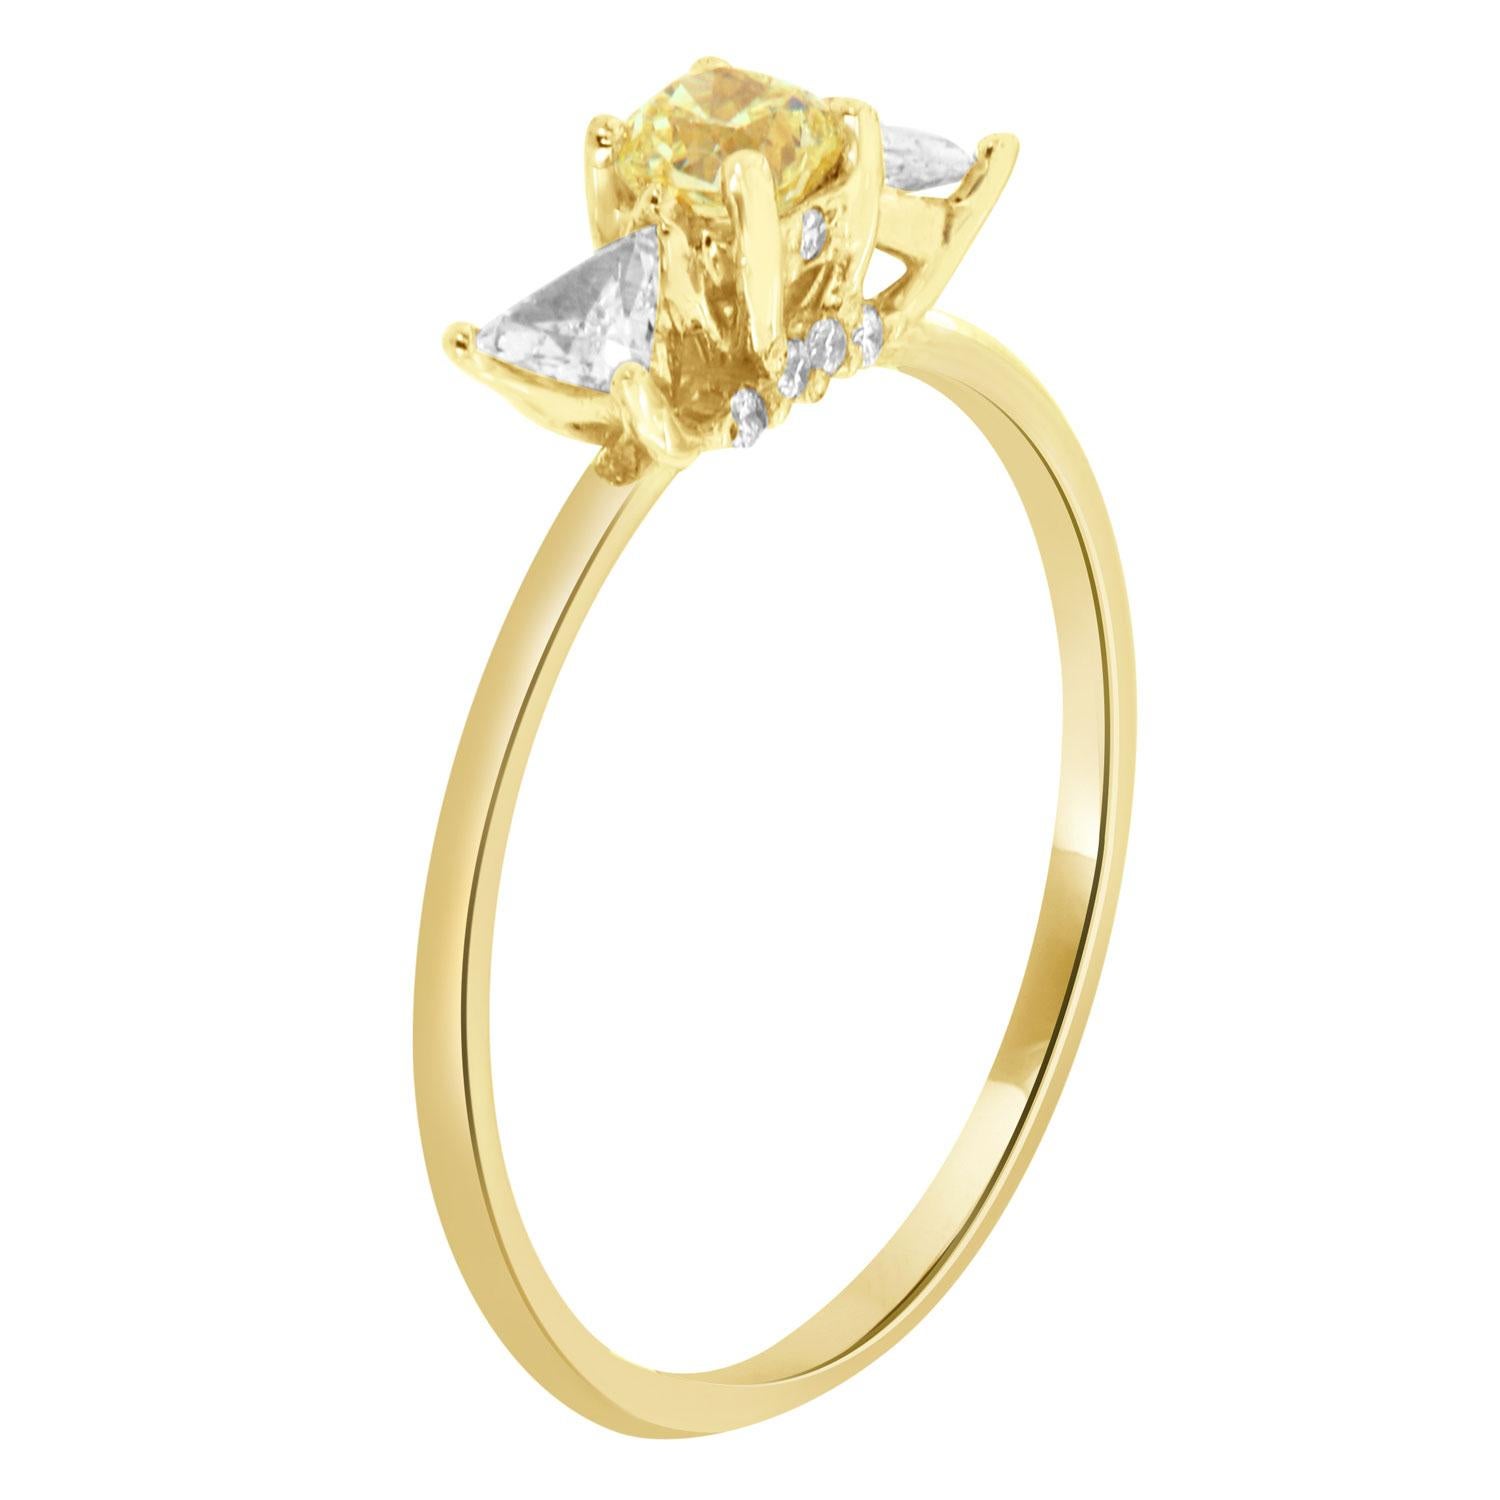 This 14k delicate ring features a 0.22 Carat Square Cushion yellow diamond flanked by two 0.14 Carat pointed Trillion-shaped diamonds. A 0.05 Carat 1.00 mm hidden white diamond set along with the basket. The band is  1.2 mm wide.